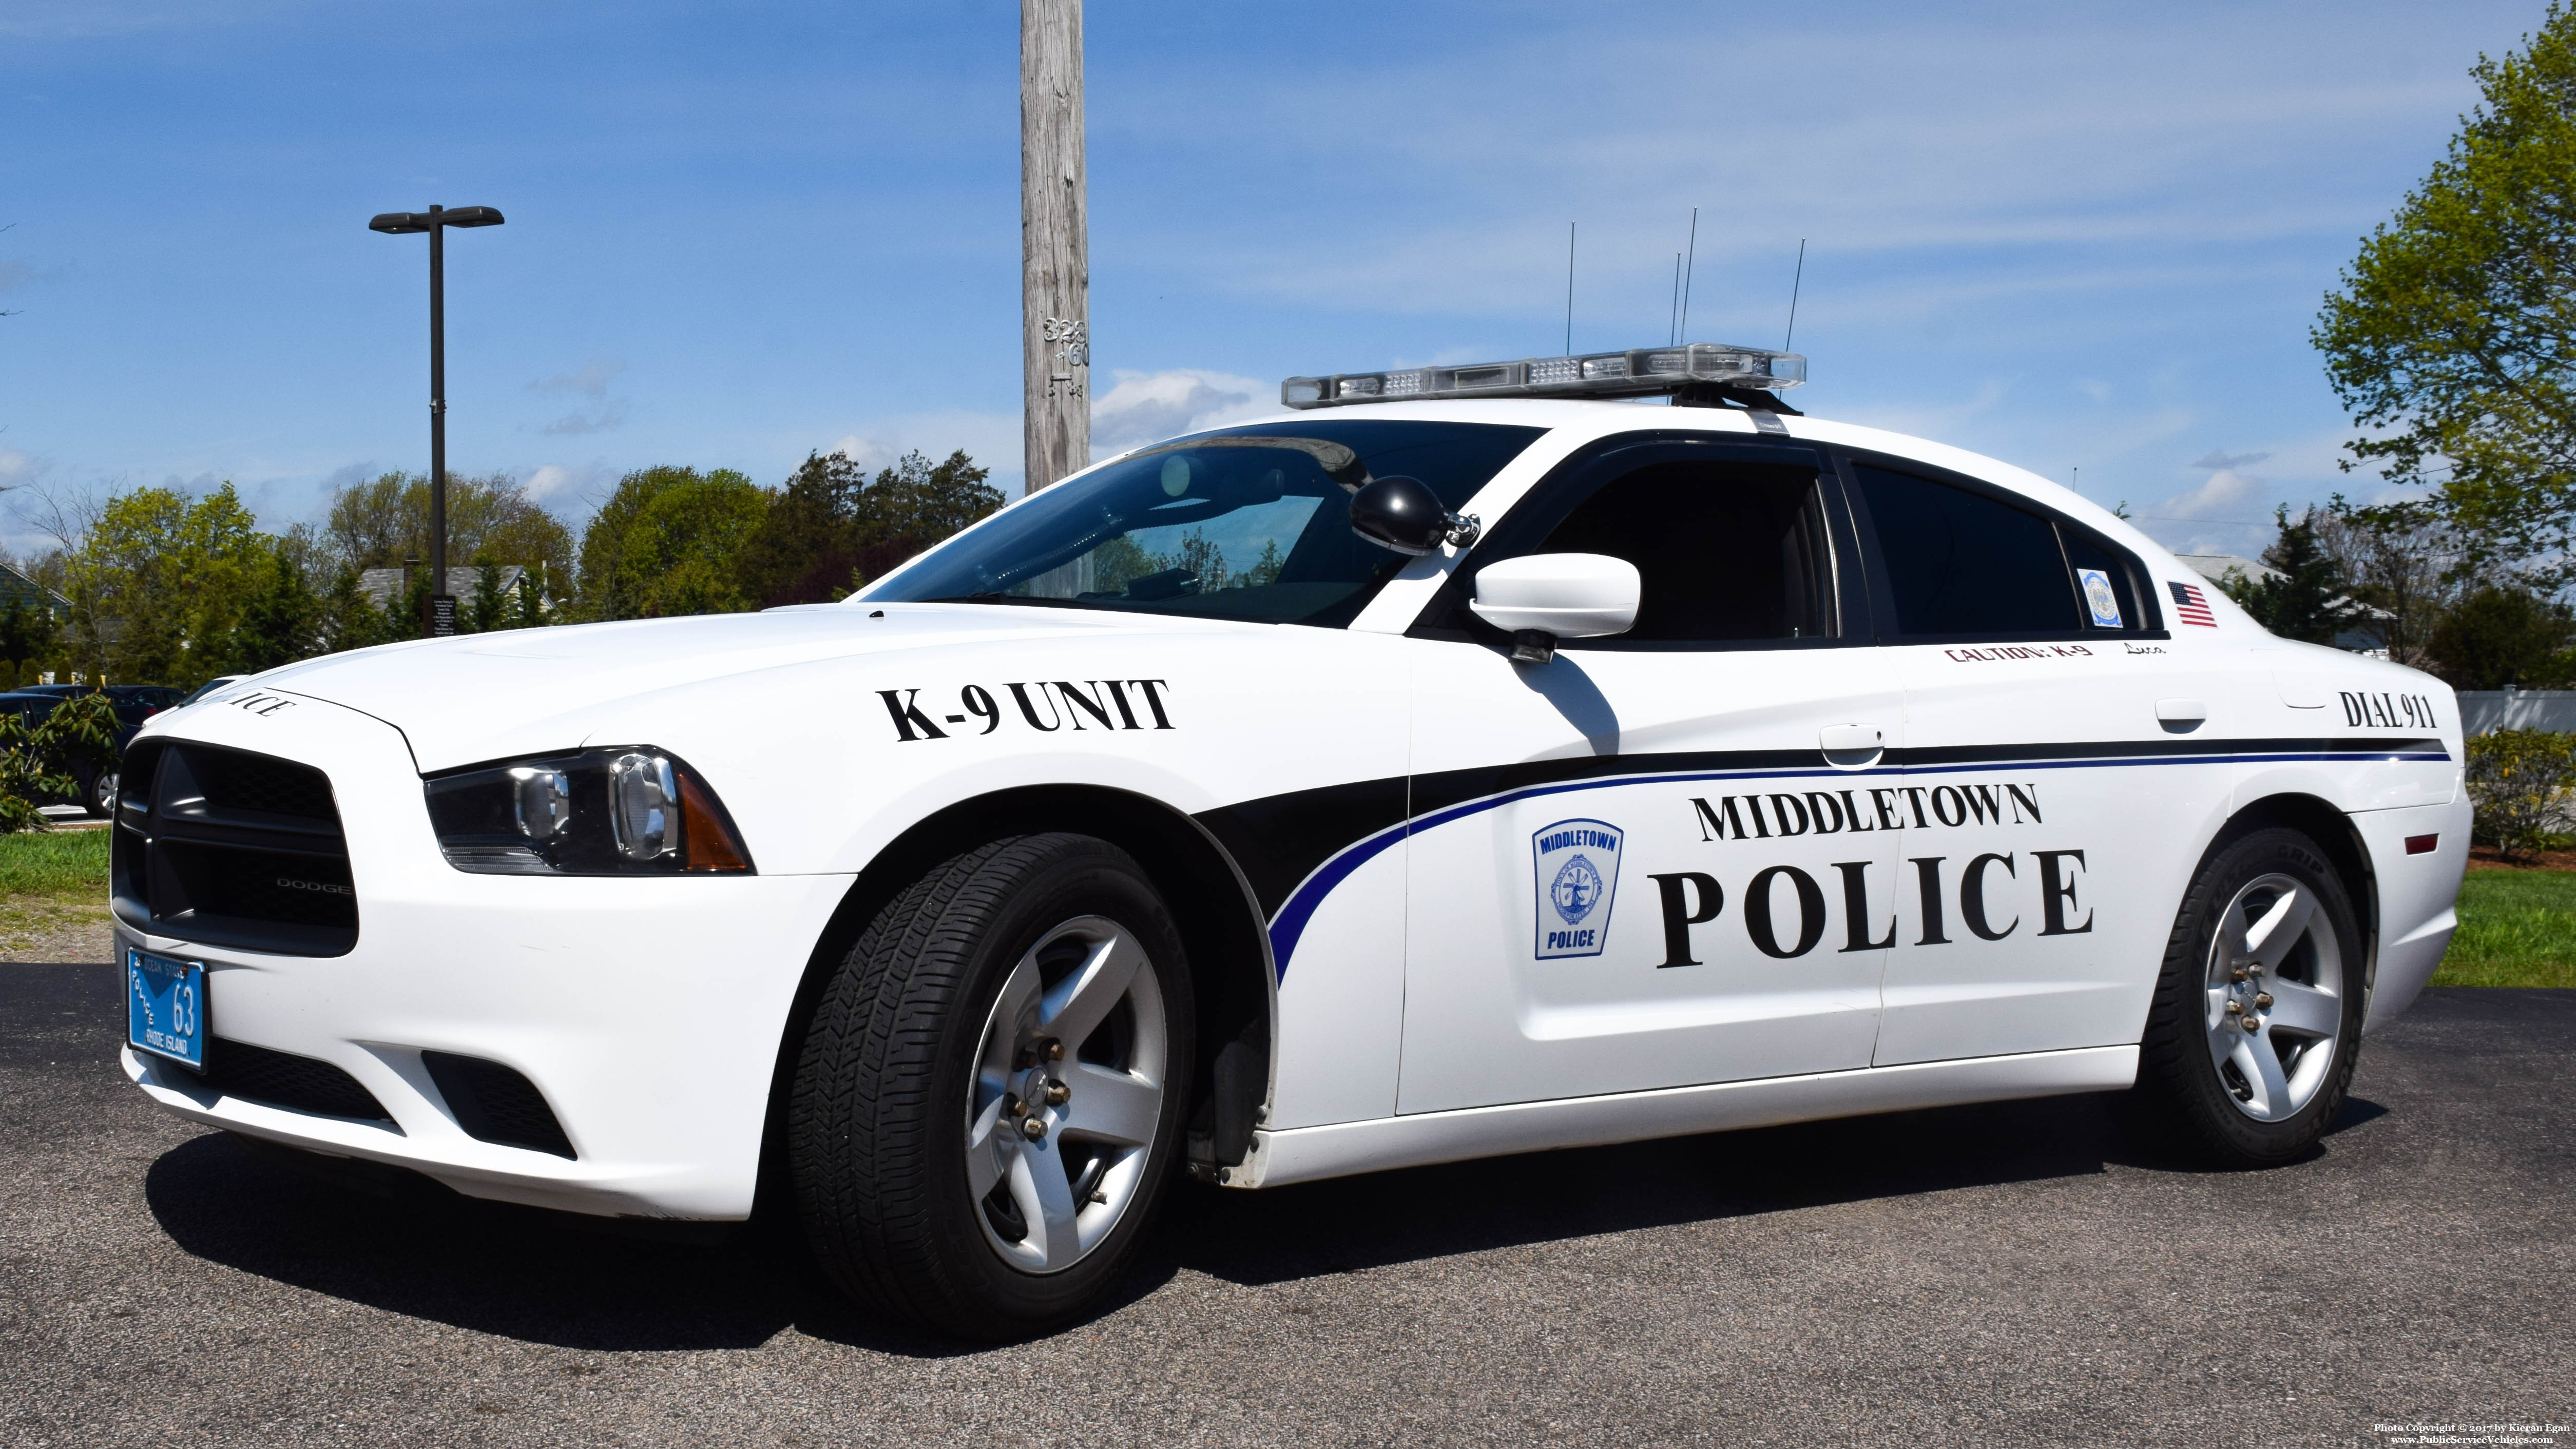 A photo  of Middletown Police
            Cruiser 63, a 2014 Dodge Charger             taken by Kieran Egan